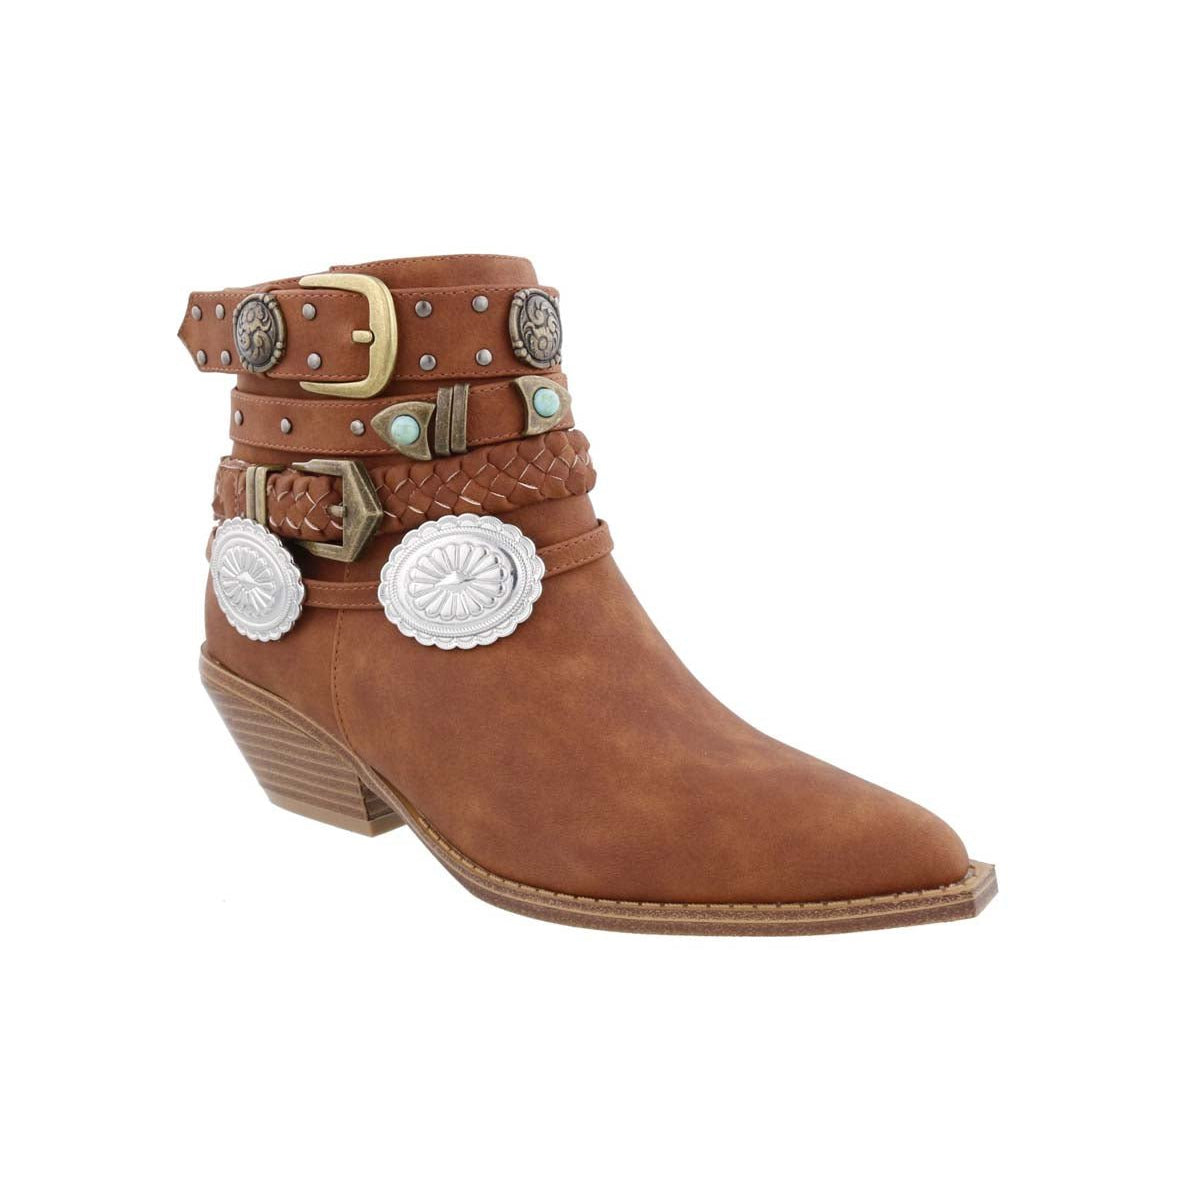 PENNY LOVES KENNY SHANE WOMEN BOOT IN BROWN DISTRESSED SYNTHETIC - TLW Shoes